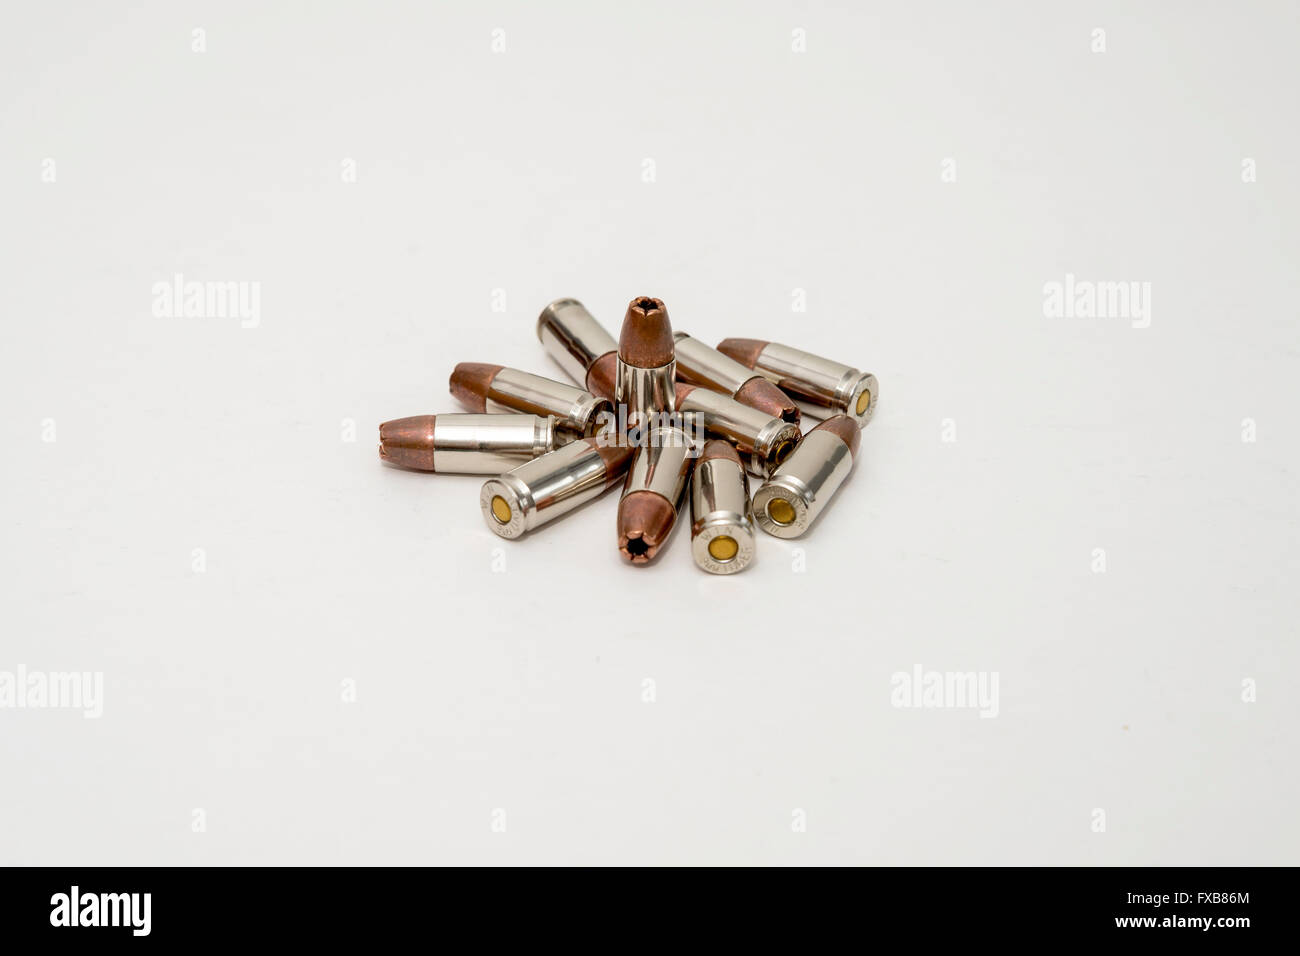 Winchester PDX1 defender 9mm luger 147 grain bullets Stock Photo